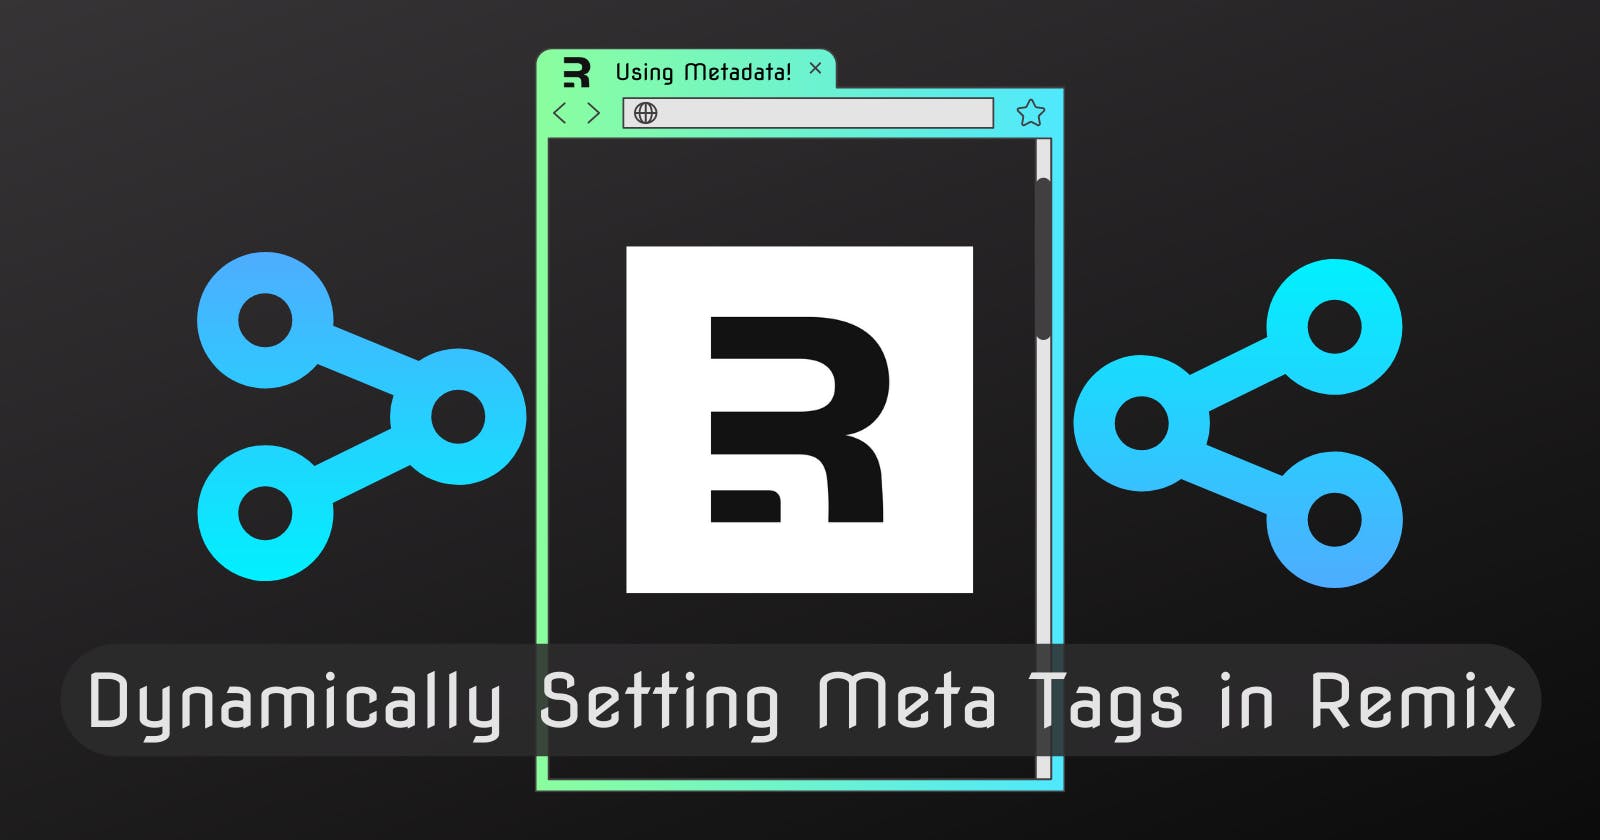 Dynamically Setting Meta Tags in Remix